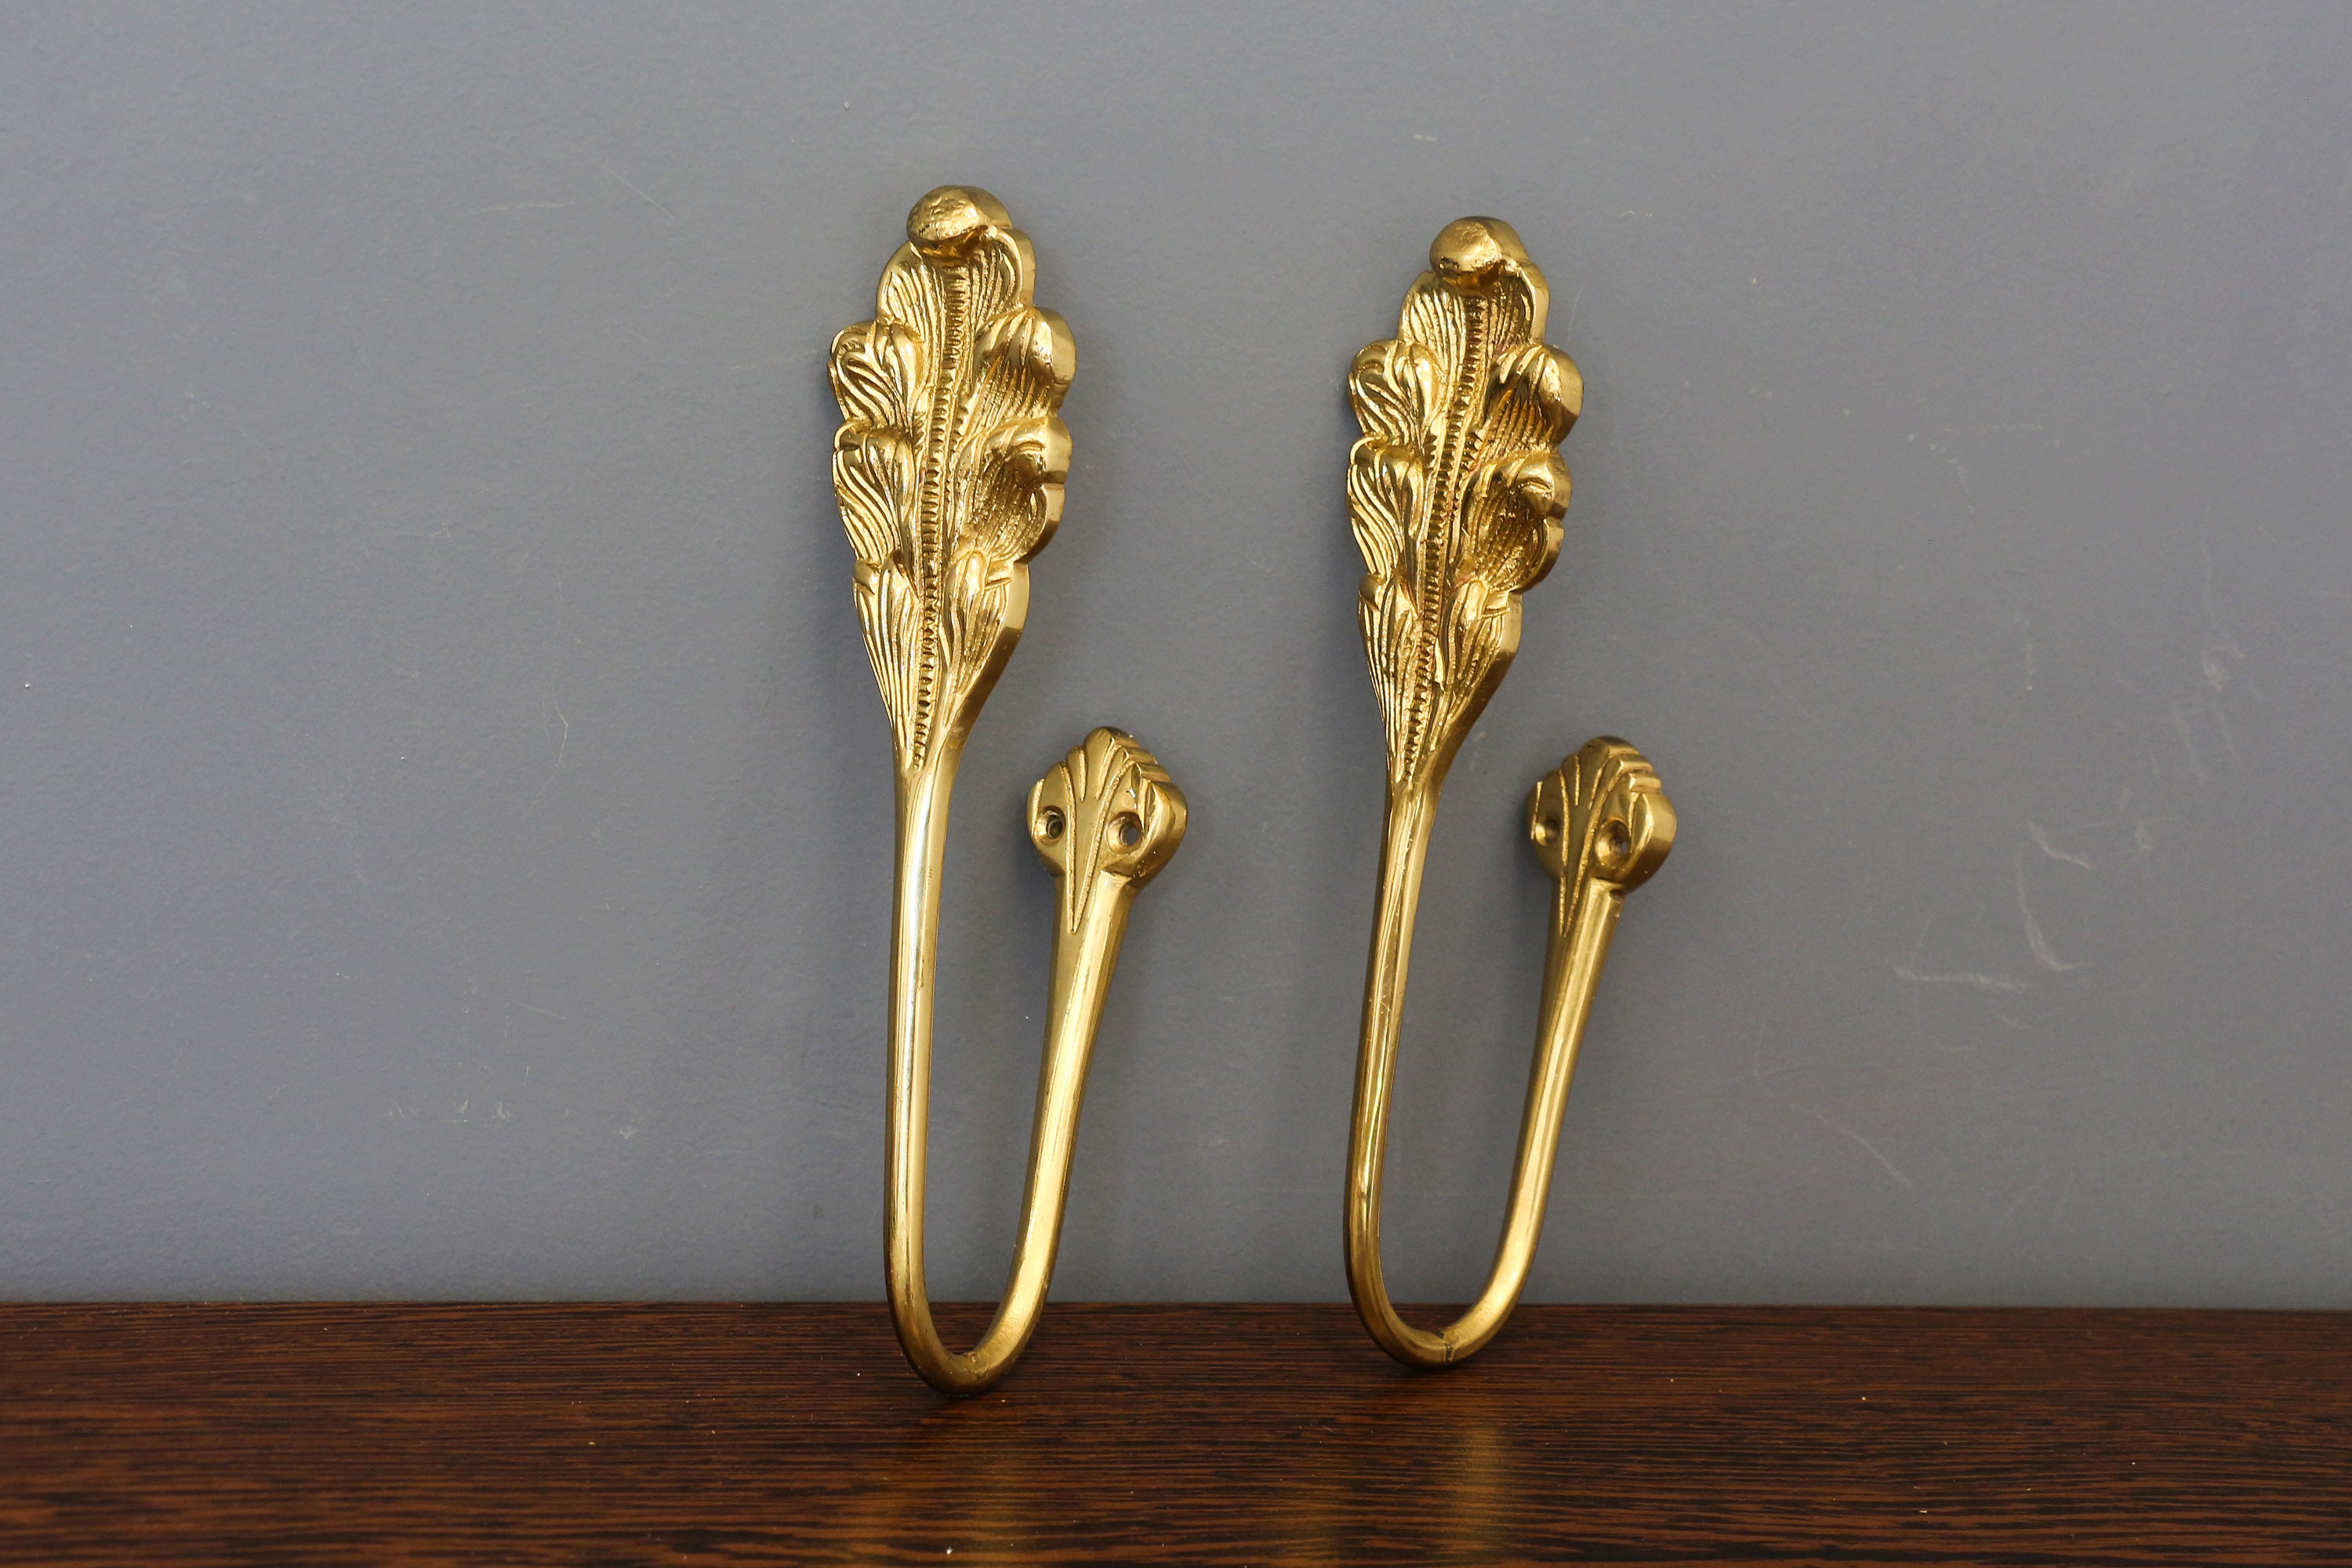 Pair of Louis XIV Baroque Style Gilt Bronze Curtain Hooks or Tie Backs Set  of 2